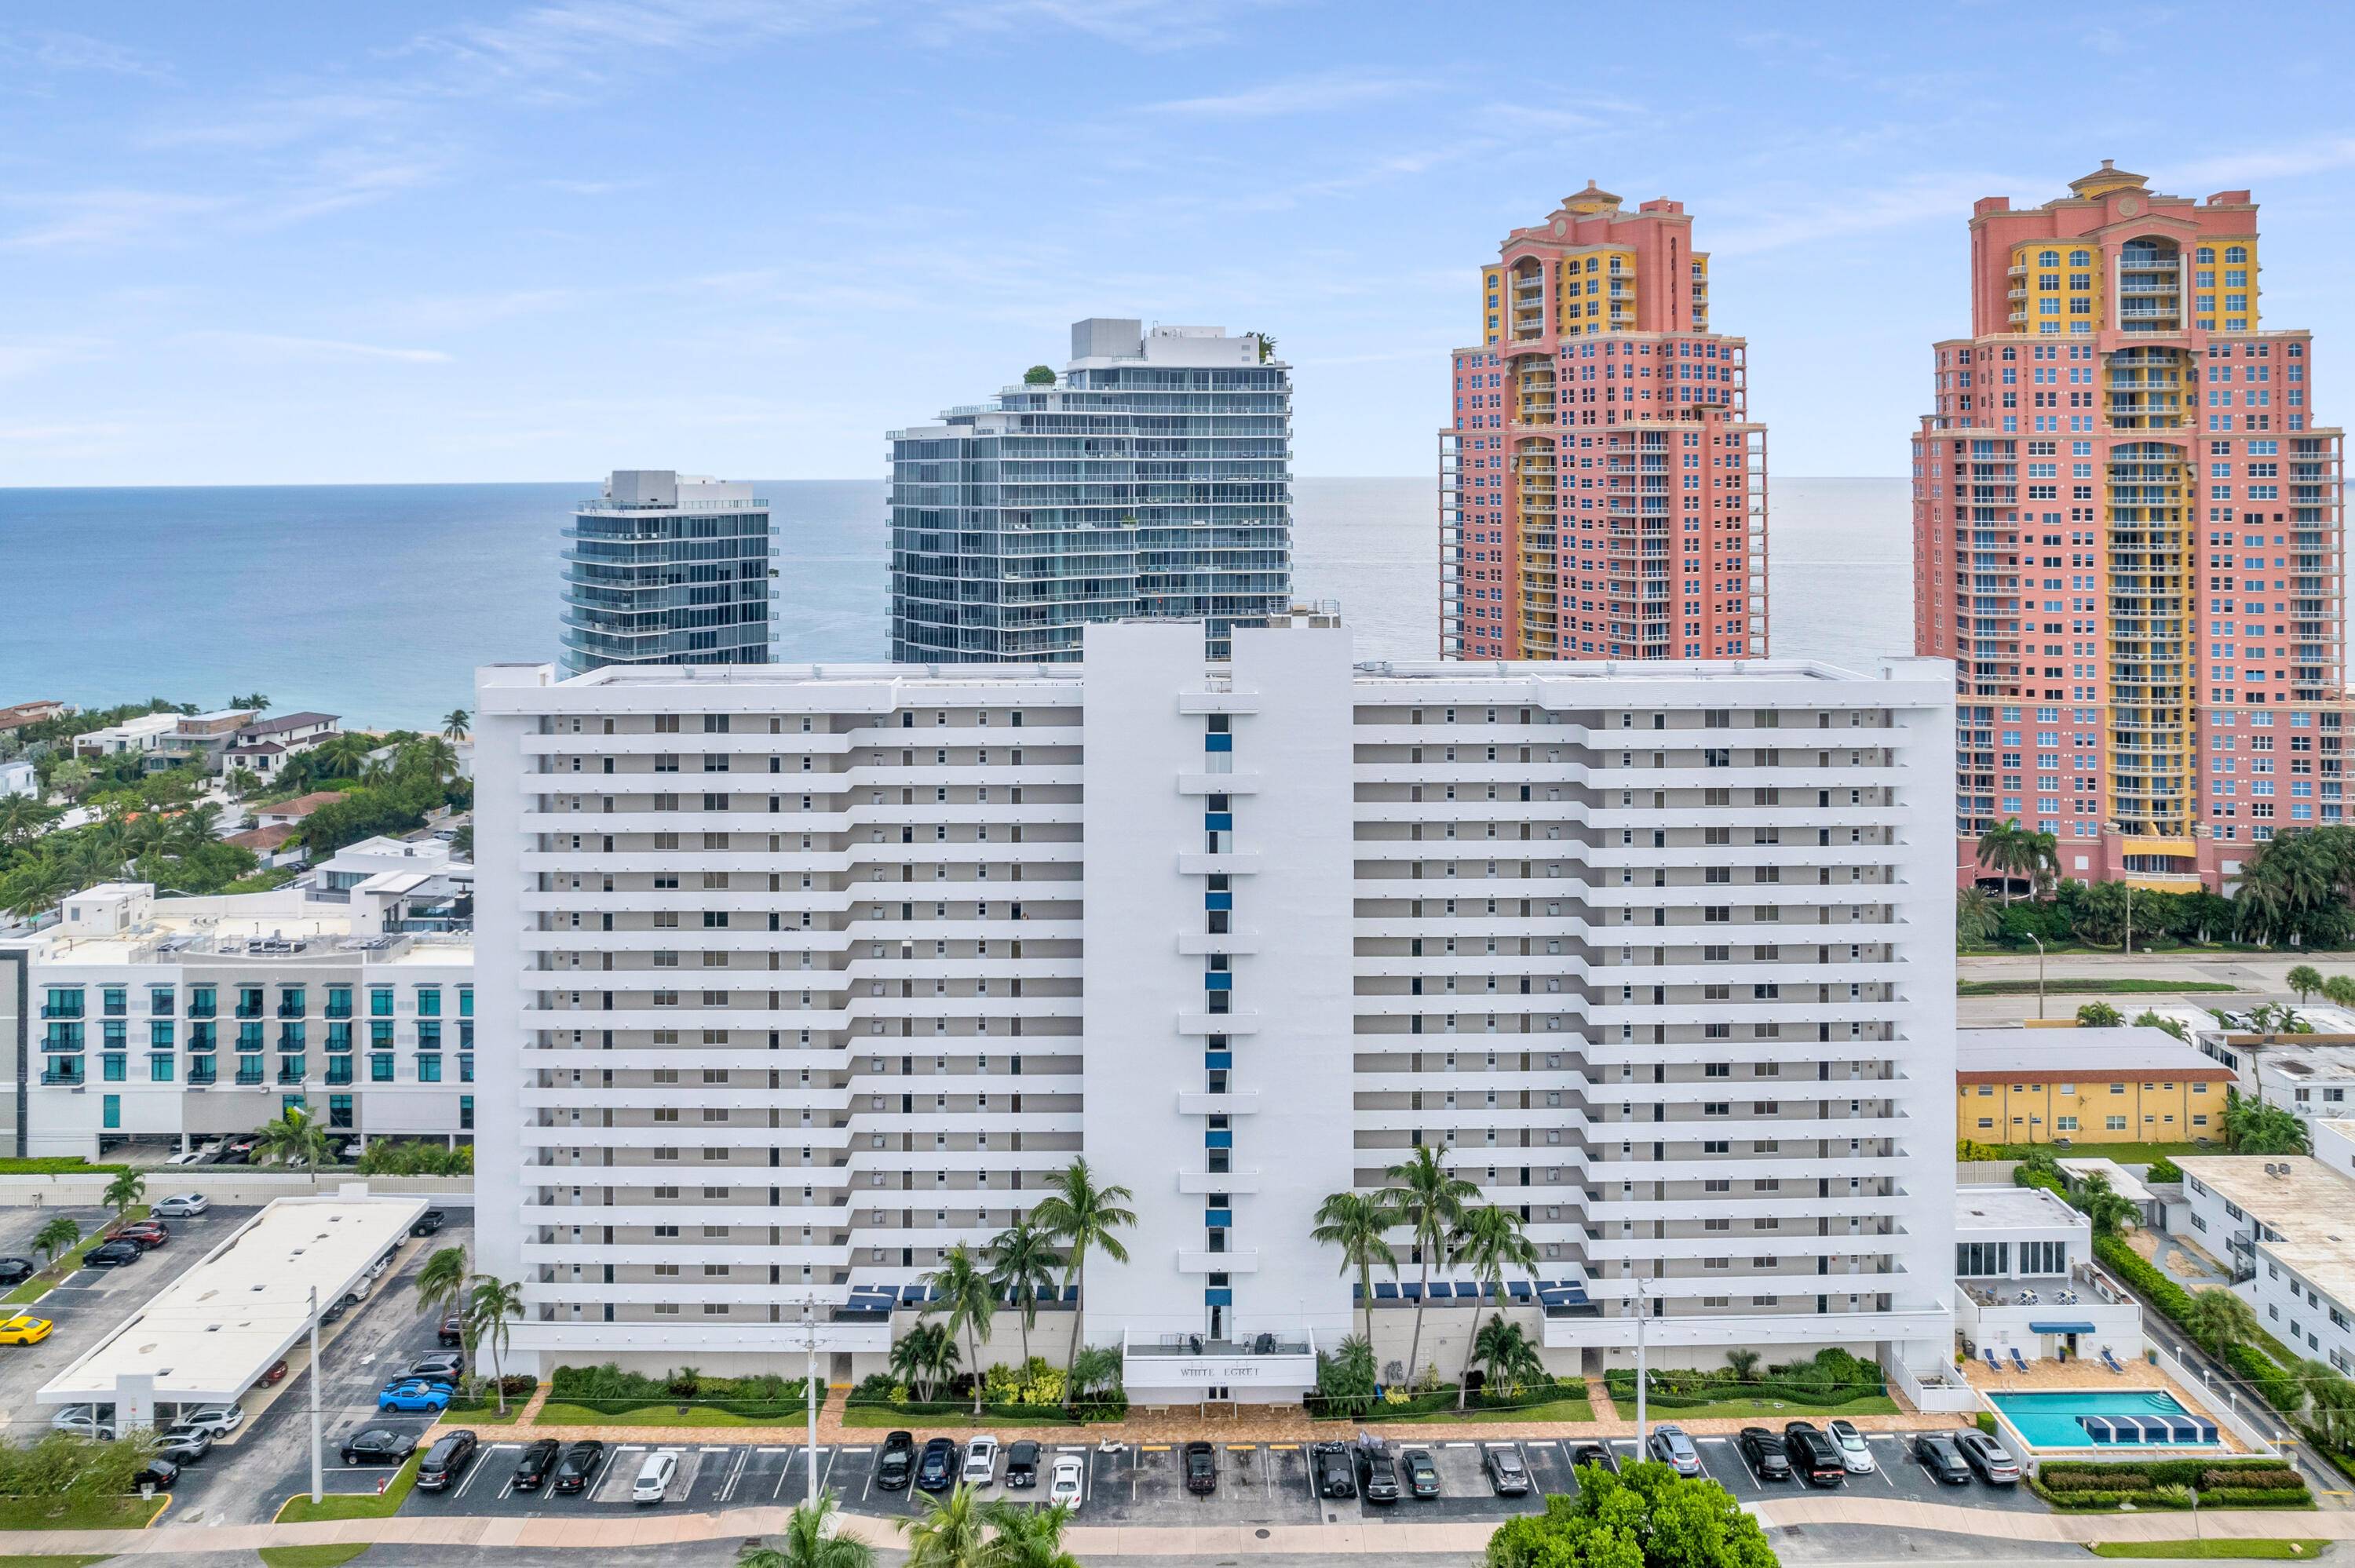 Discover the opulence Fort Lauderdale has to offer in this exquisite two bedroom one and a half bathroom located one block away from Fort Lauderdale Beach.